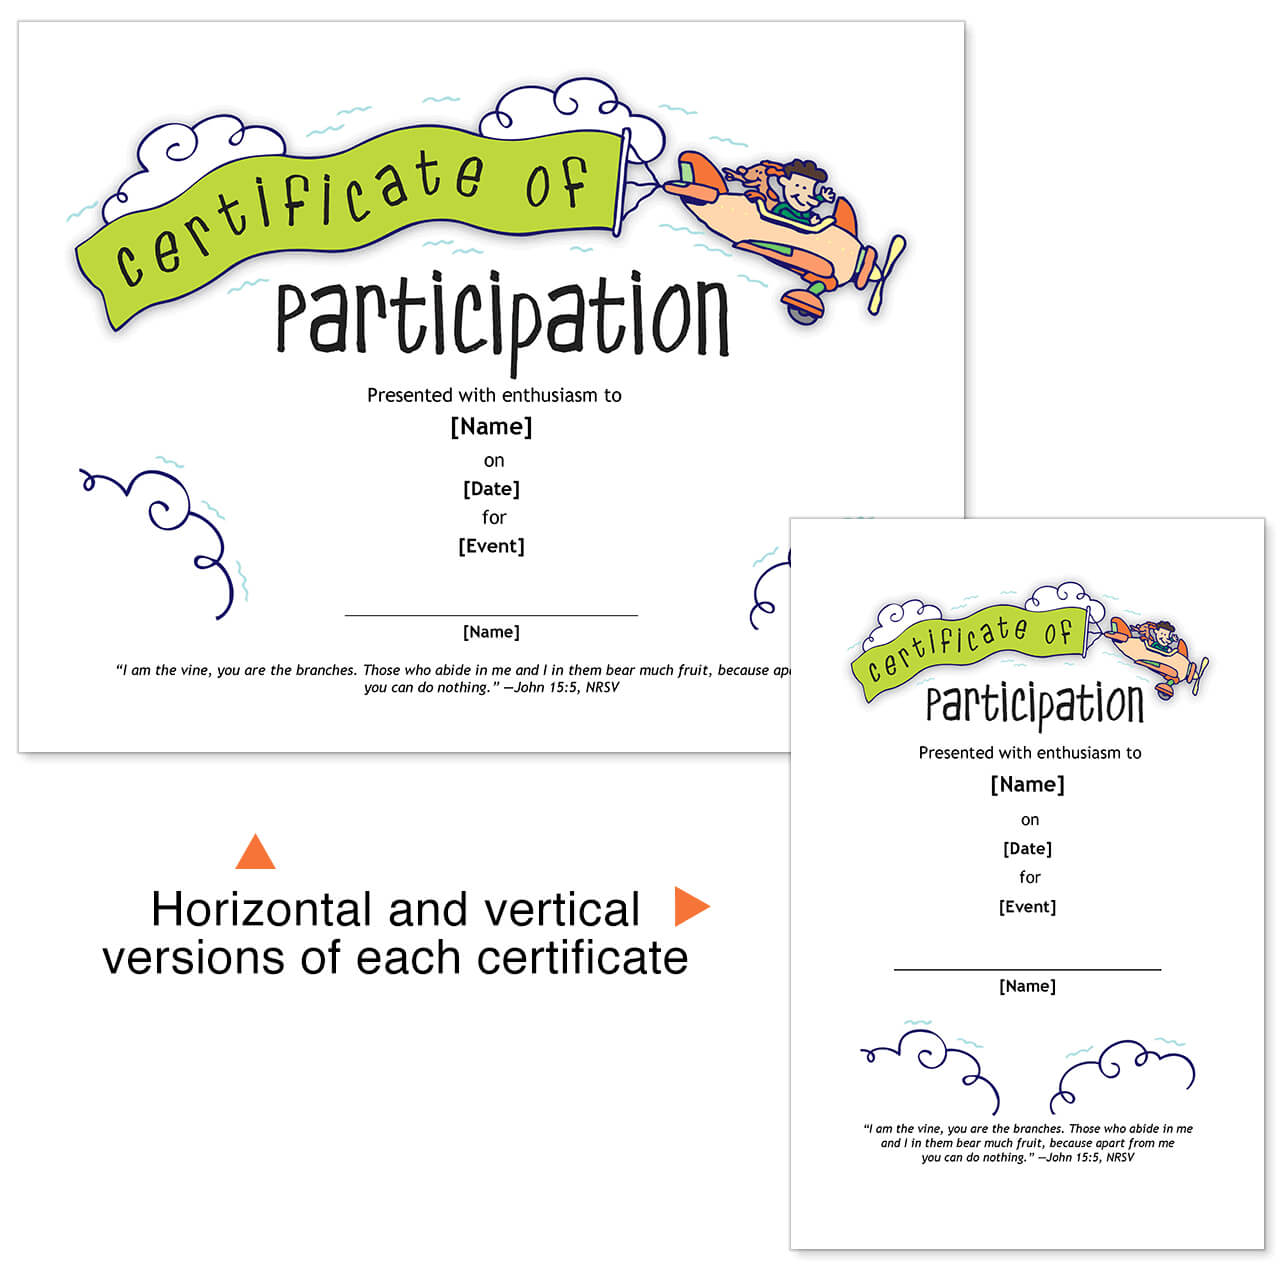 Church Certificate Template For Participation In Vbs, Sunday Throughout Vbs Certificate Template